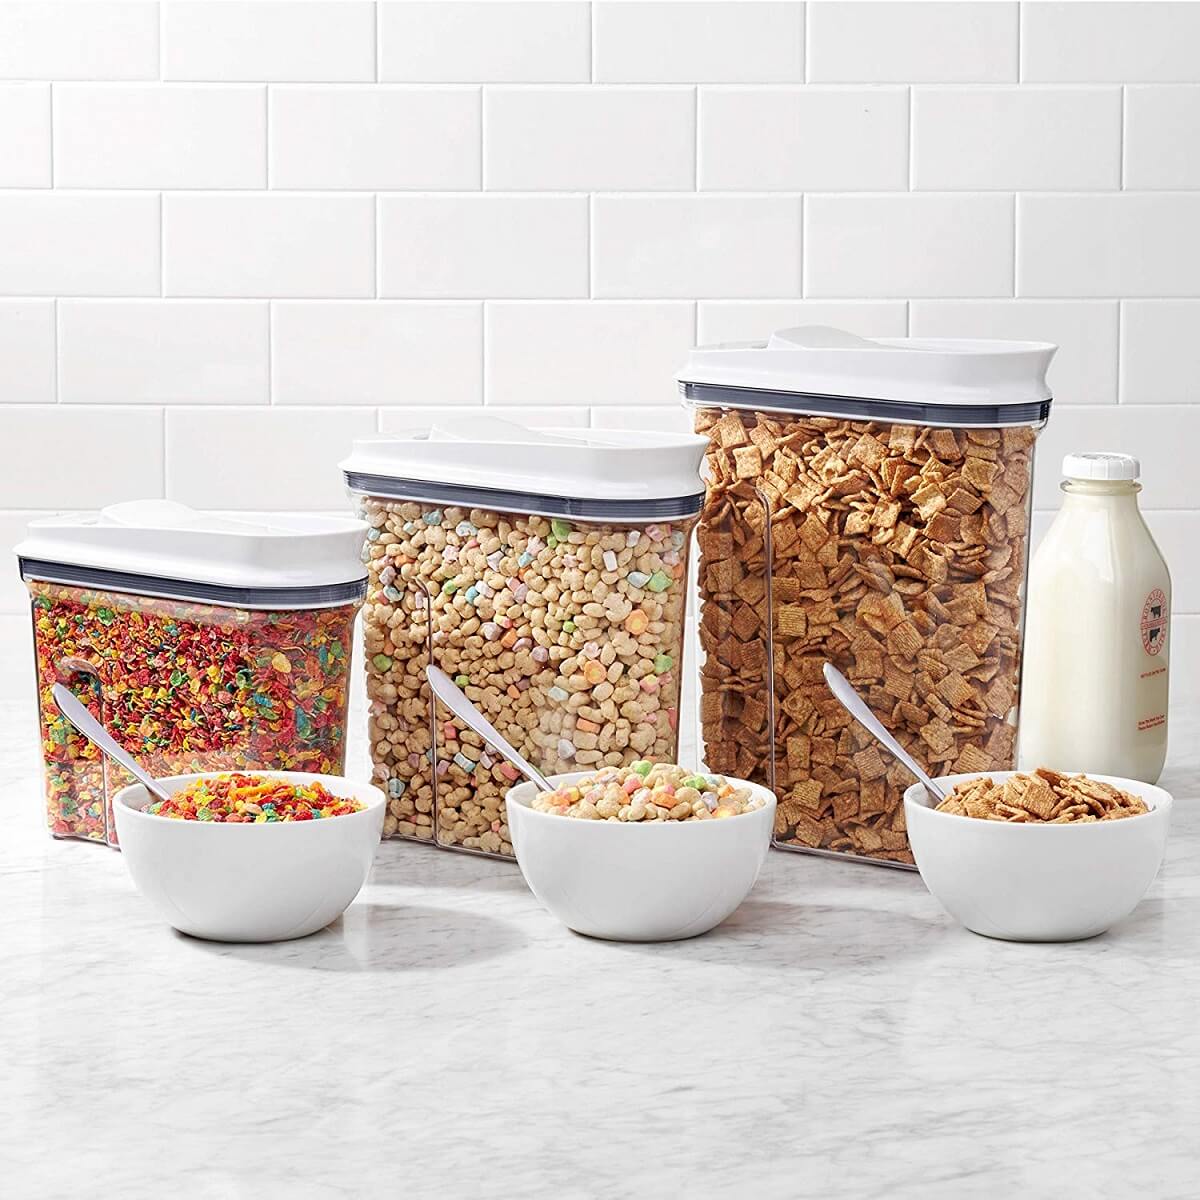 oxo cereal storage bins